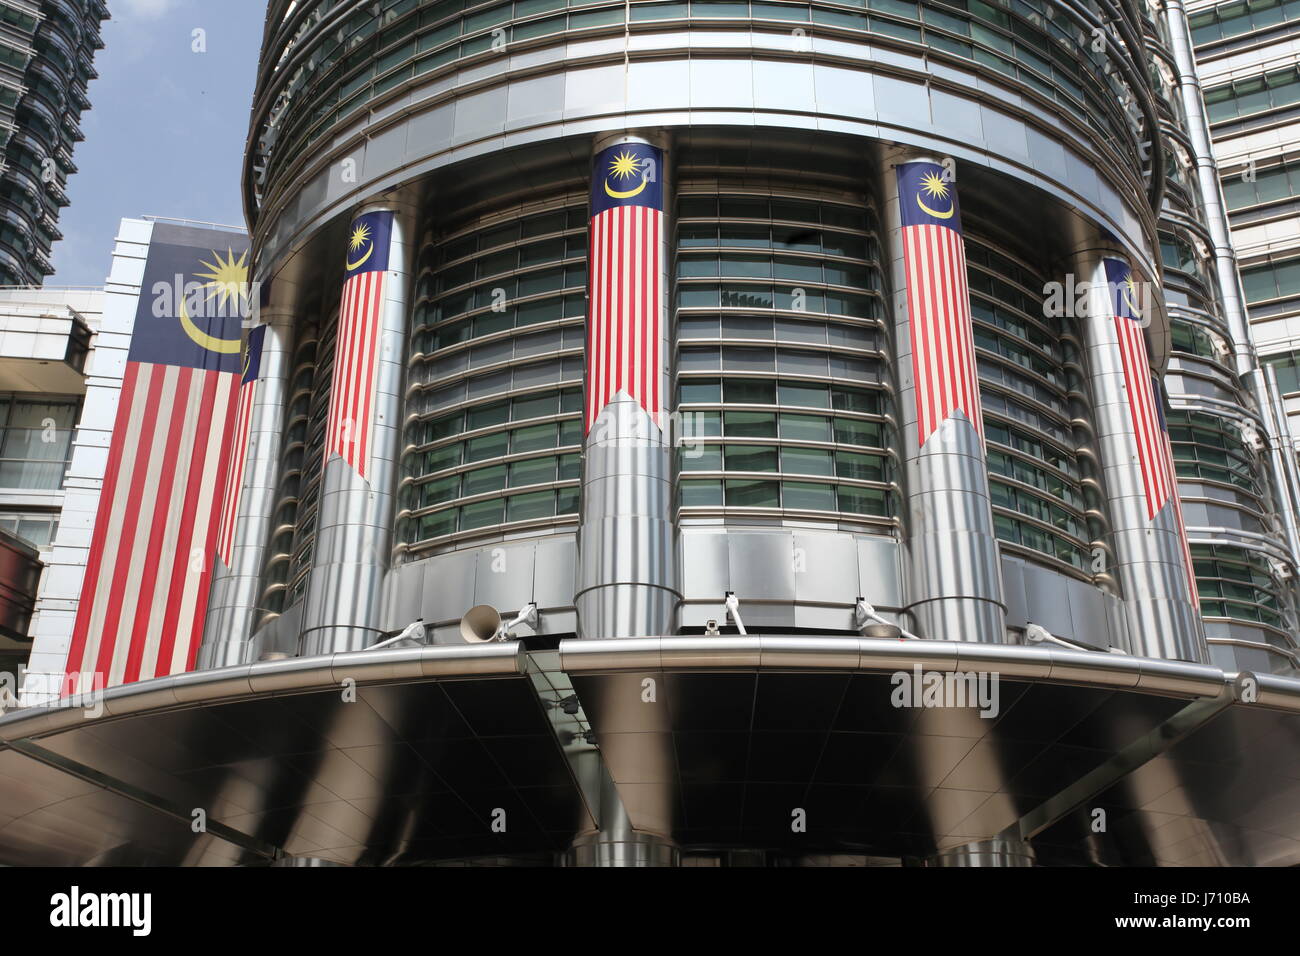 malaysia flag travel house multistory building multistorey building multi-story Stock Photo